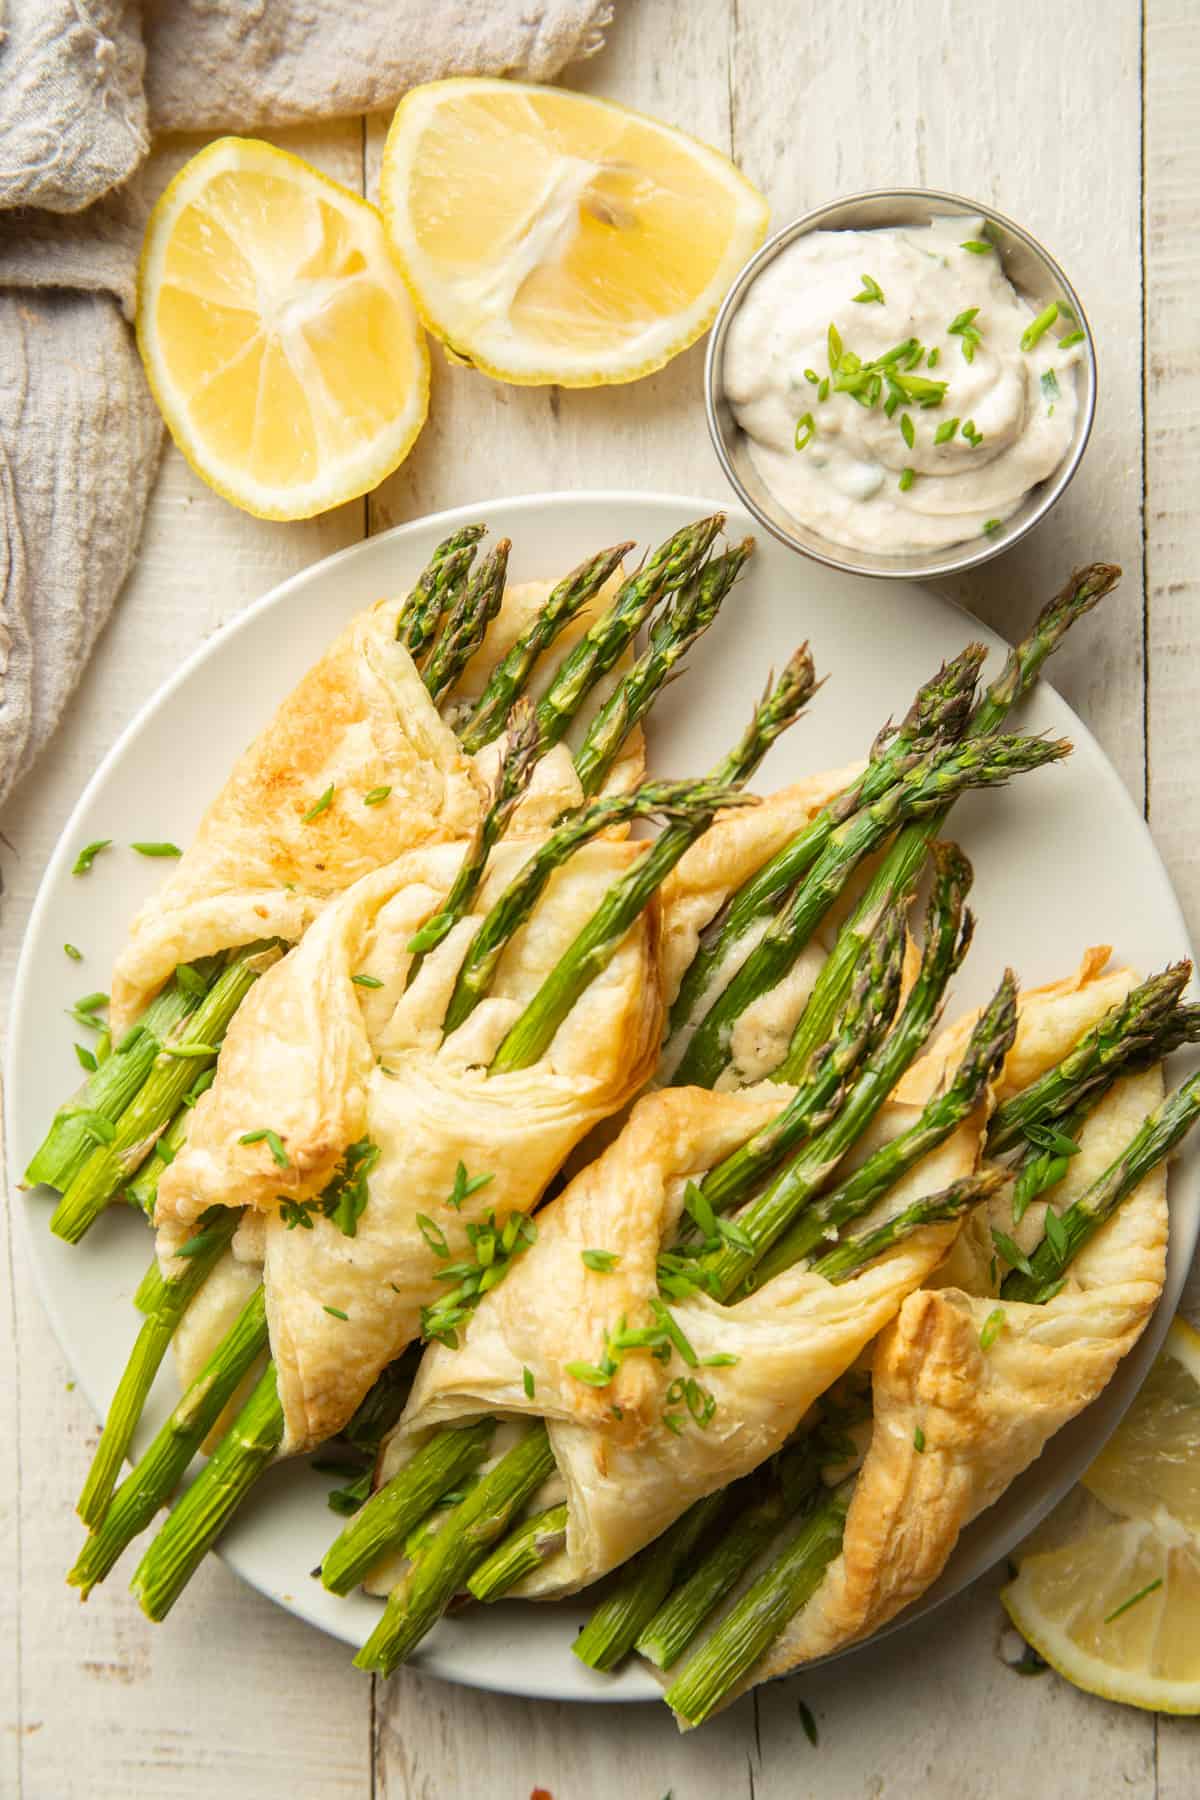 Plate of Puff Pastry Wrapped Asparagus on a wooden surface with lemon wedges and dish of cashew cheese on the side.